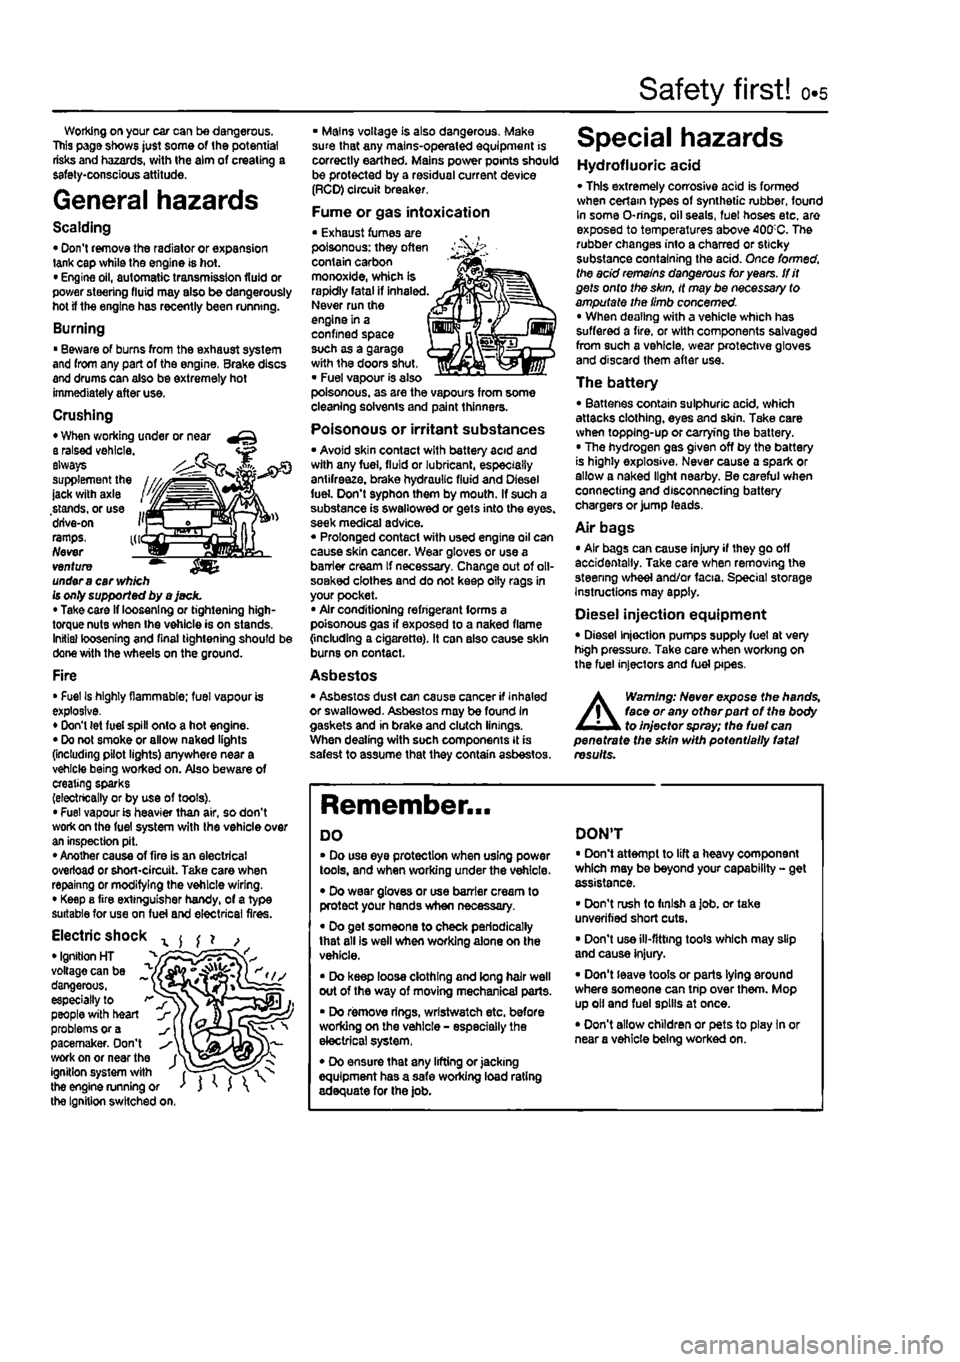 FIAT PUNTO 1997 176 / 1.G Workshop Manual 
Safety first! 0.5 
Working on your ear can be dangerous. This page shows just some of the potential risks and hazards, with the aim of creating a safety-conscious attitude. 
General hazards 
Scalding